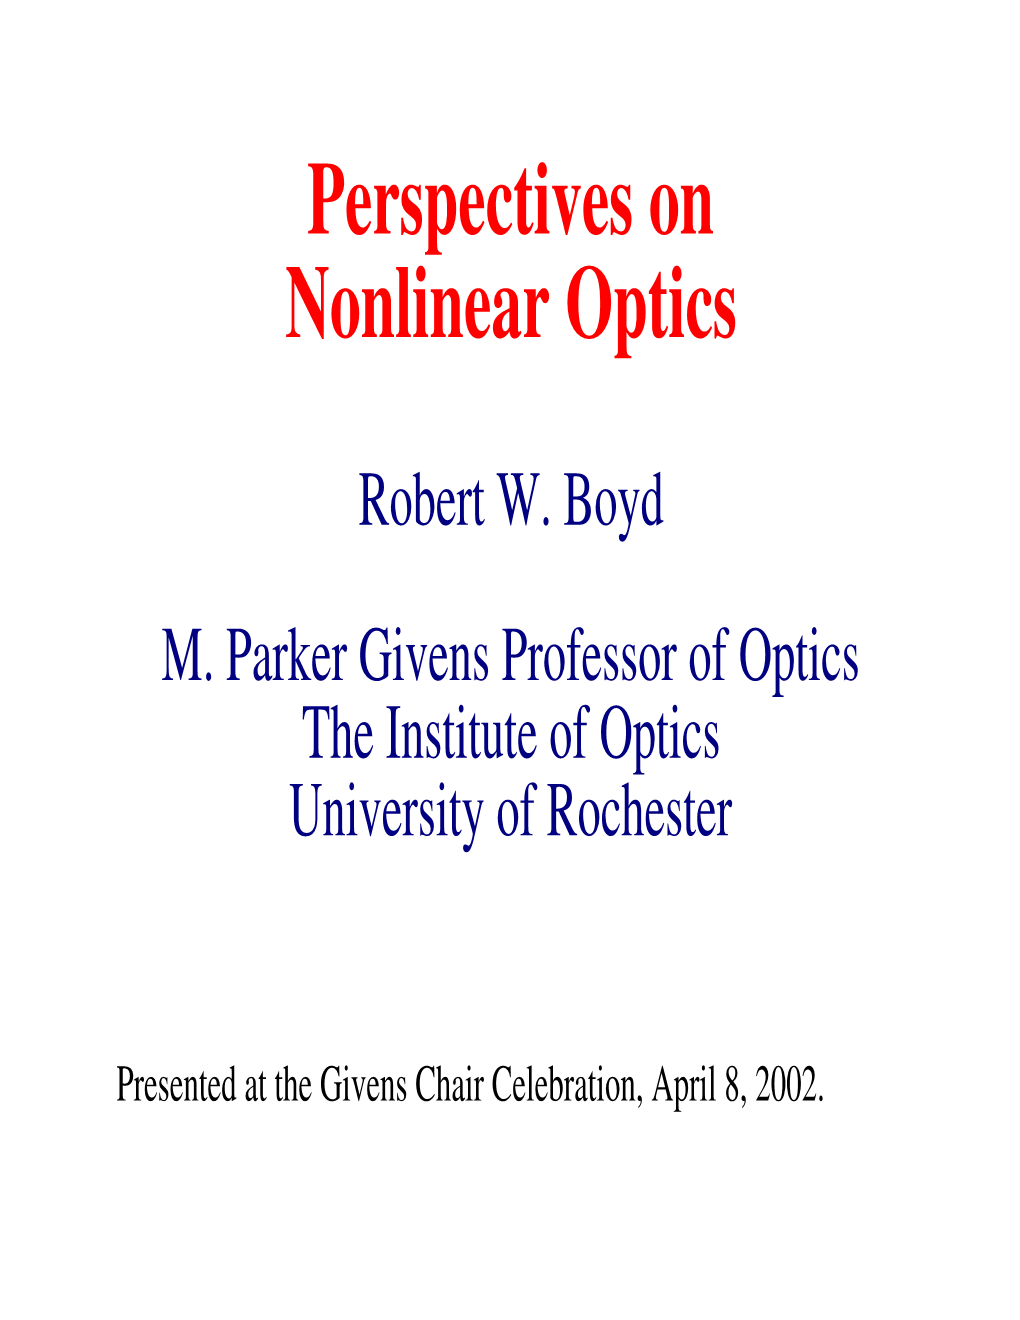 Perspectives on Nonlinear Optics